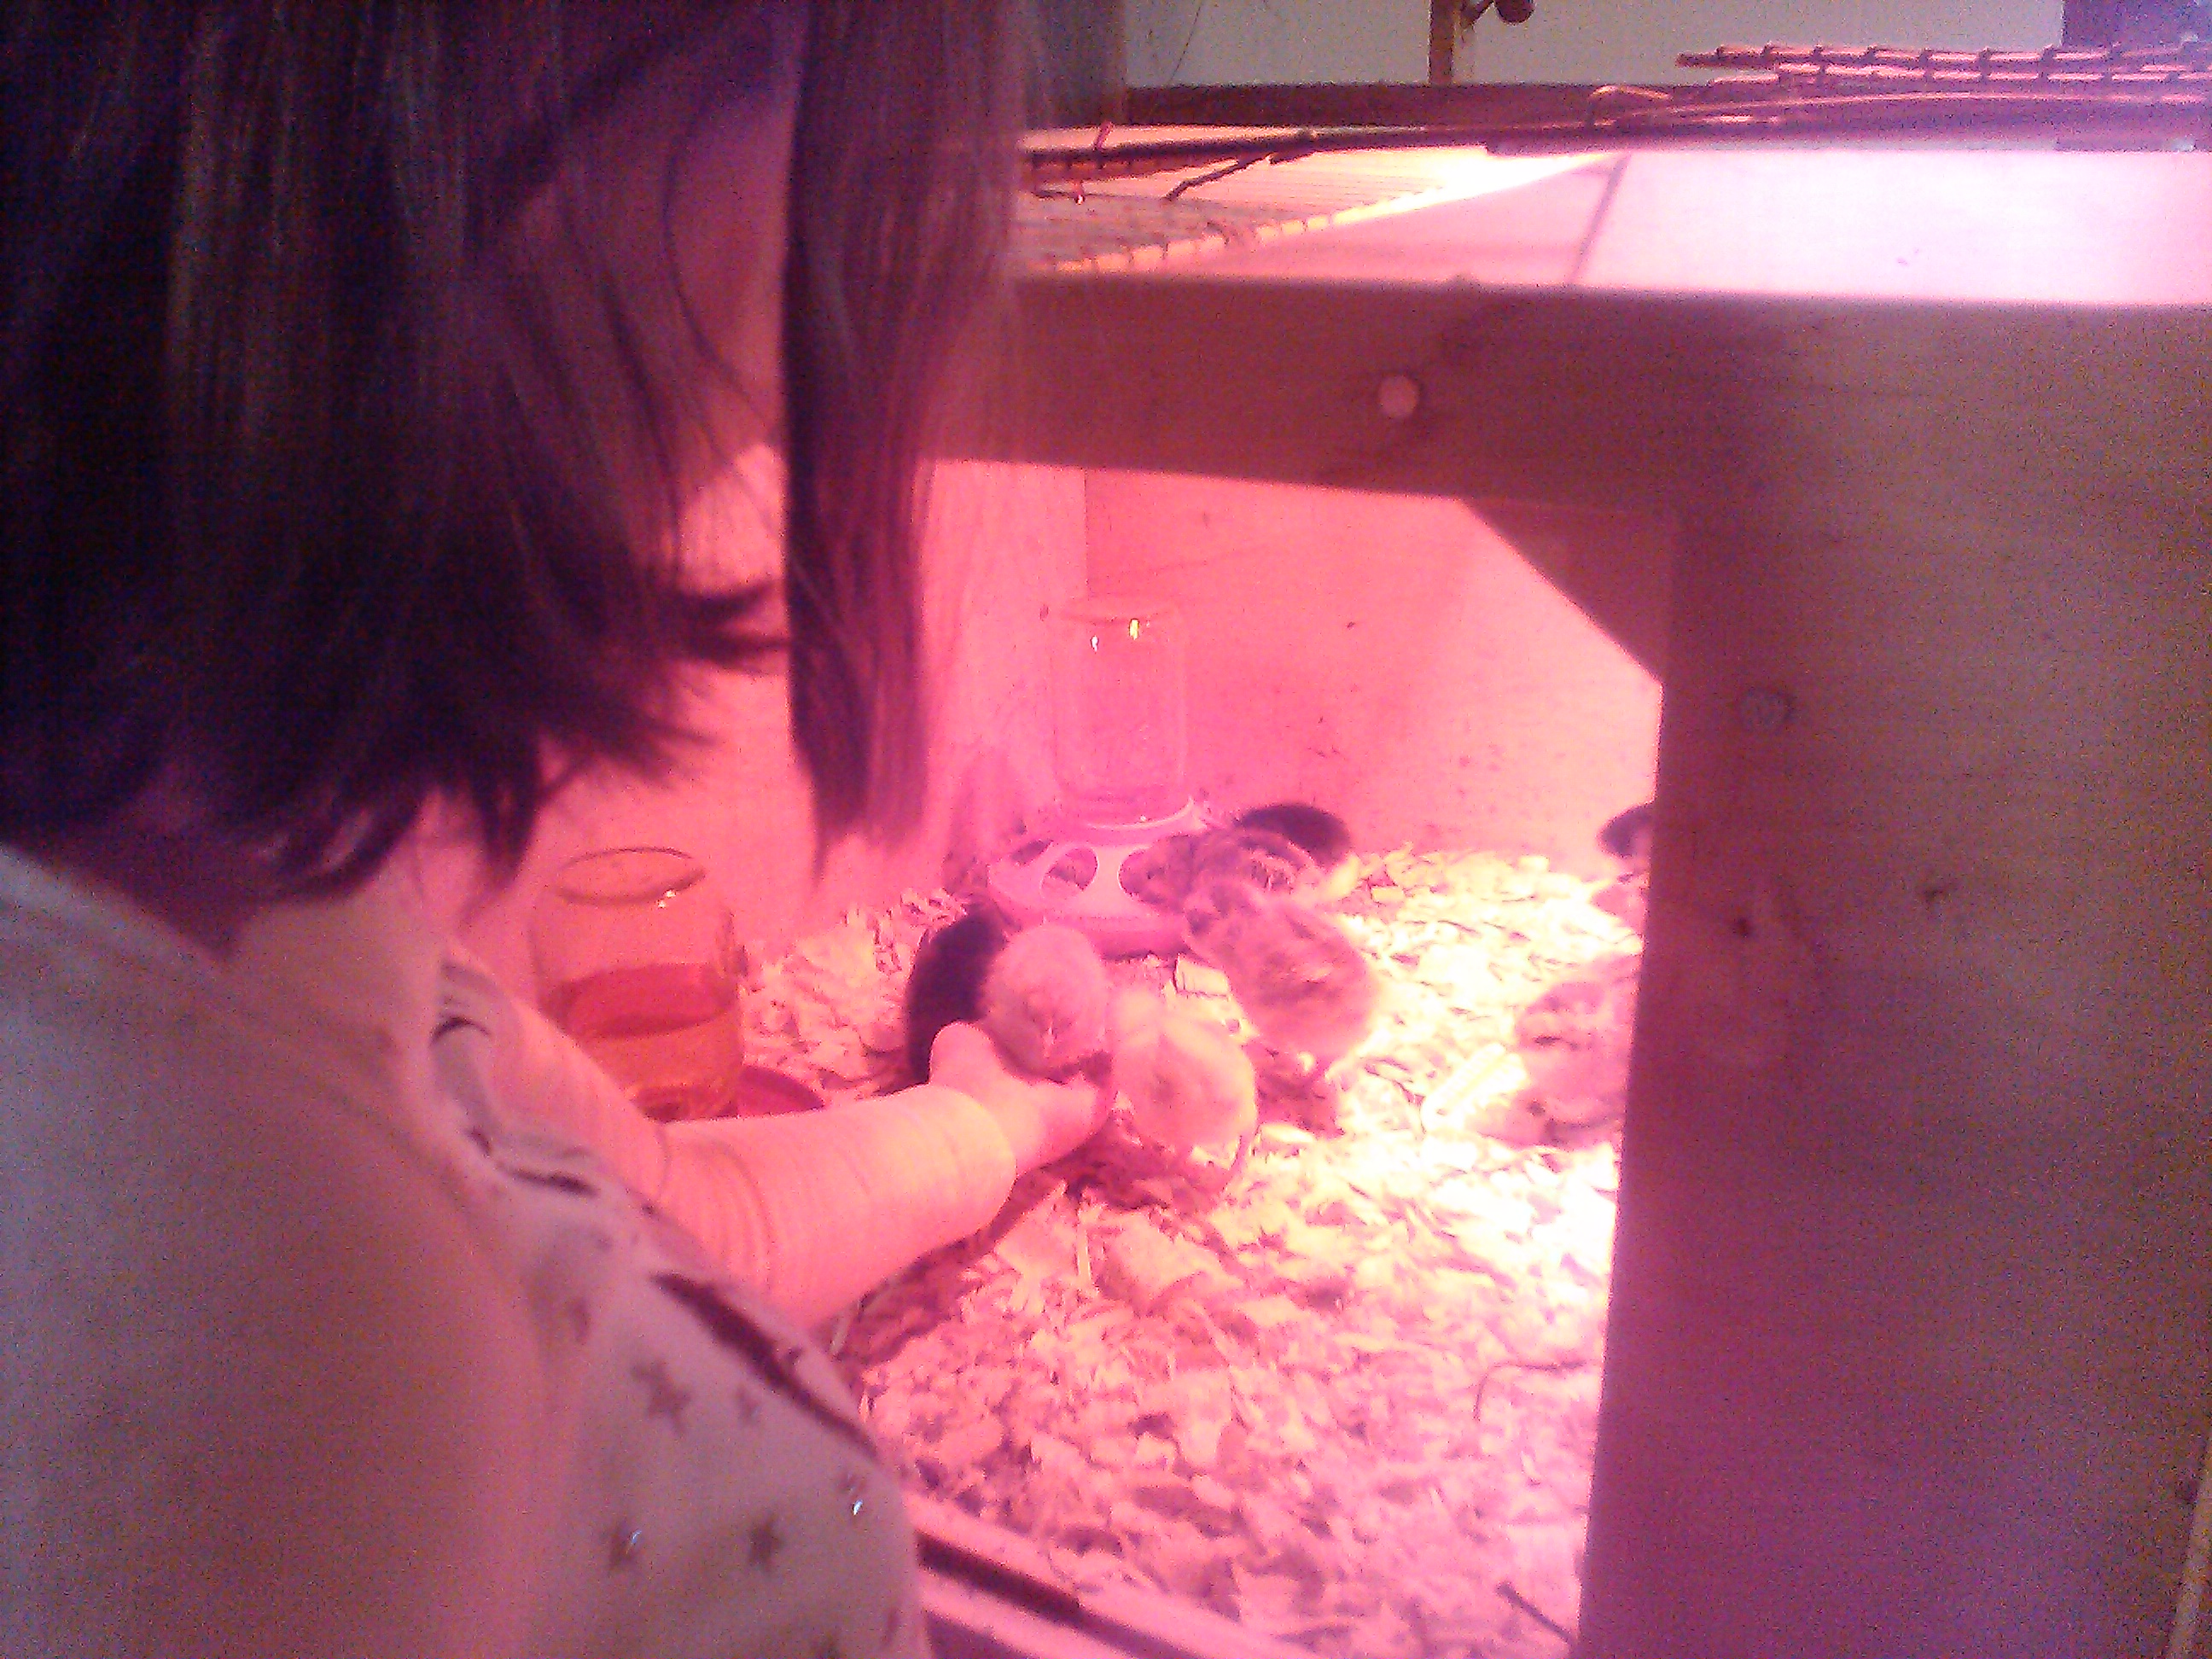 My daughter hand feeding some of the new babies